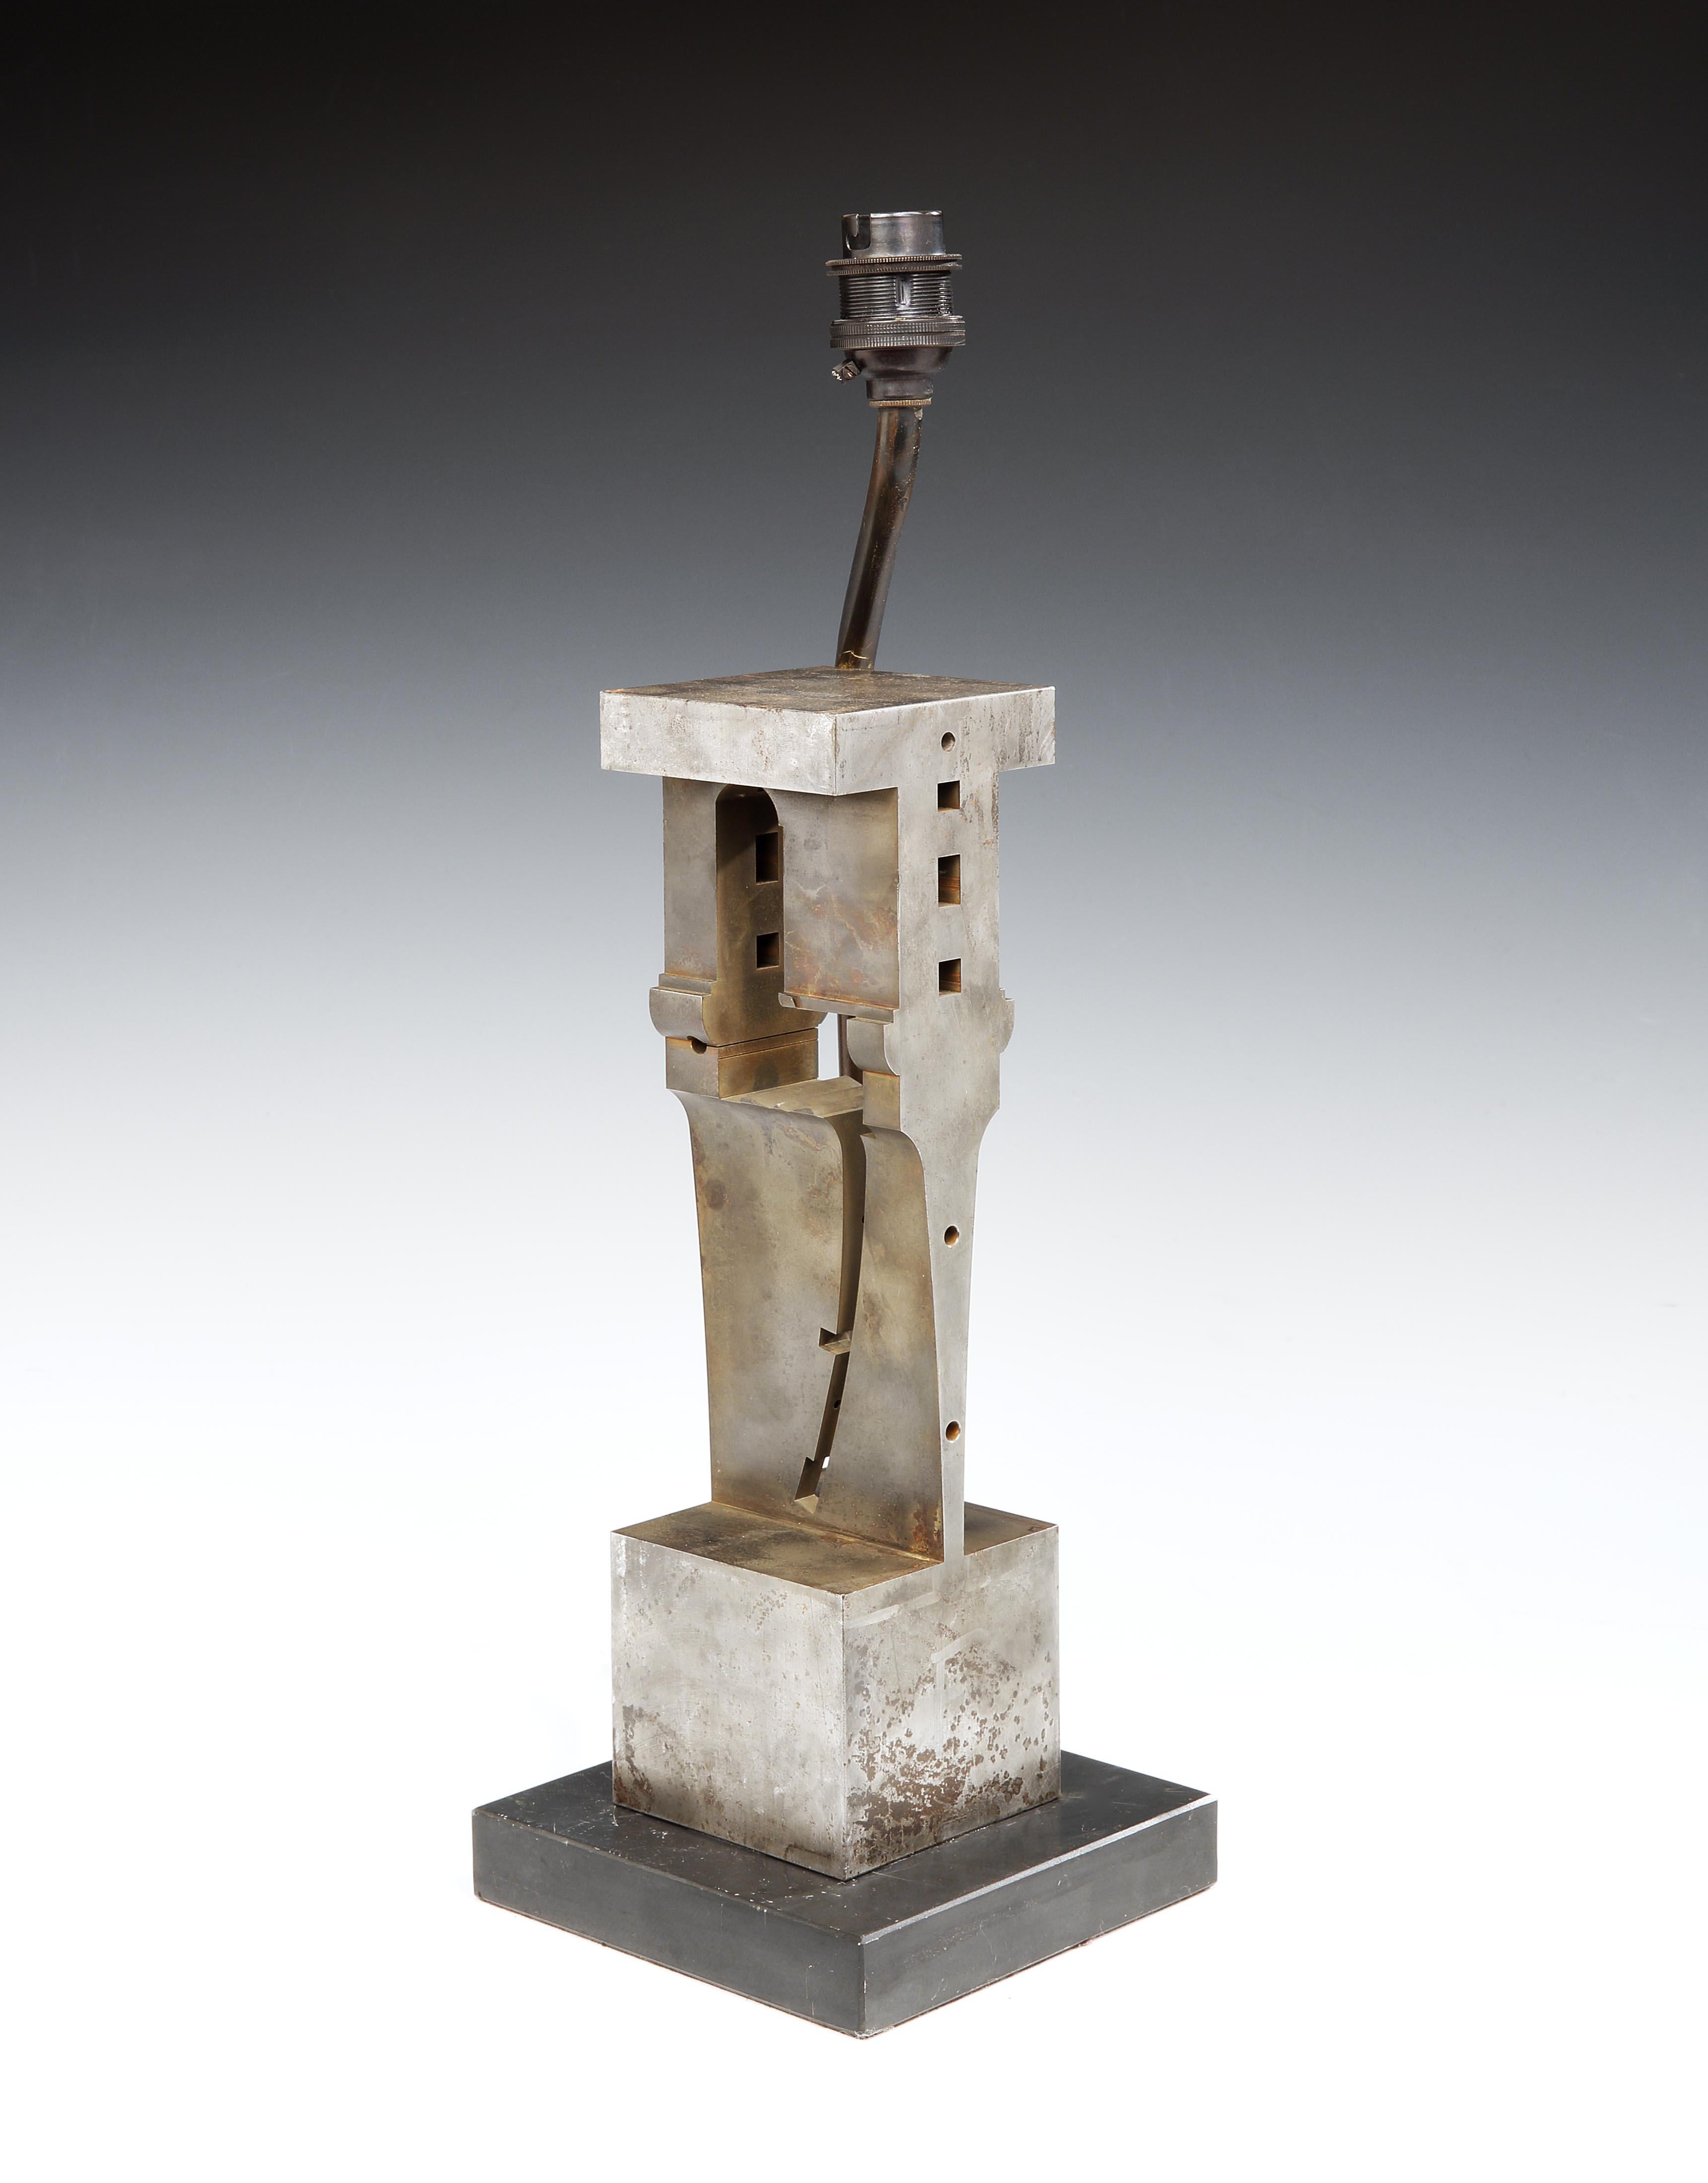 Abstract expressionist, steel, sculpture, Upcycled Into A 16” high table lamp- metal and welder sculptors rose to prominence after WWII, following Julio González and Pablo Picasso and by the 1960s abstract expressionism, predominated. 
- The strong